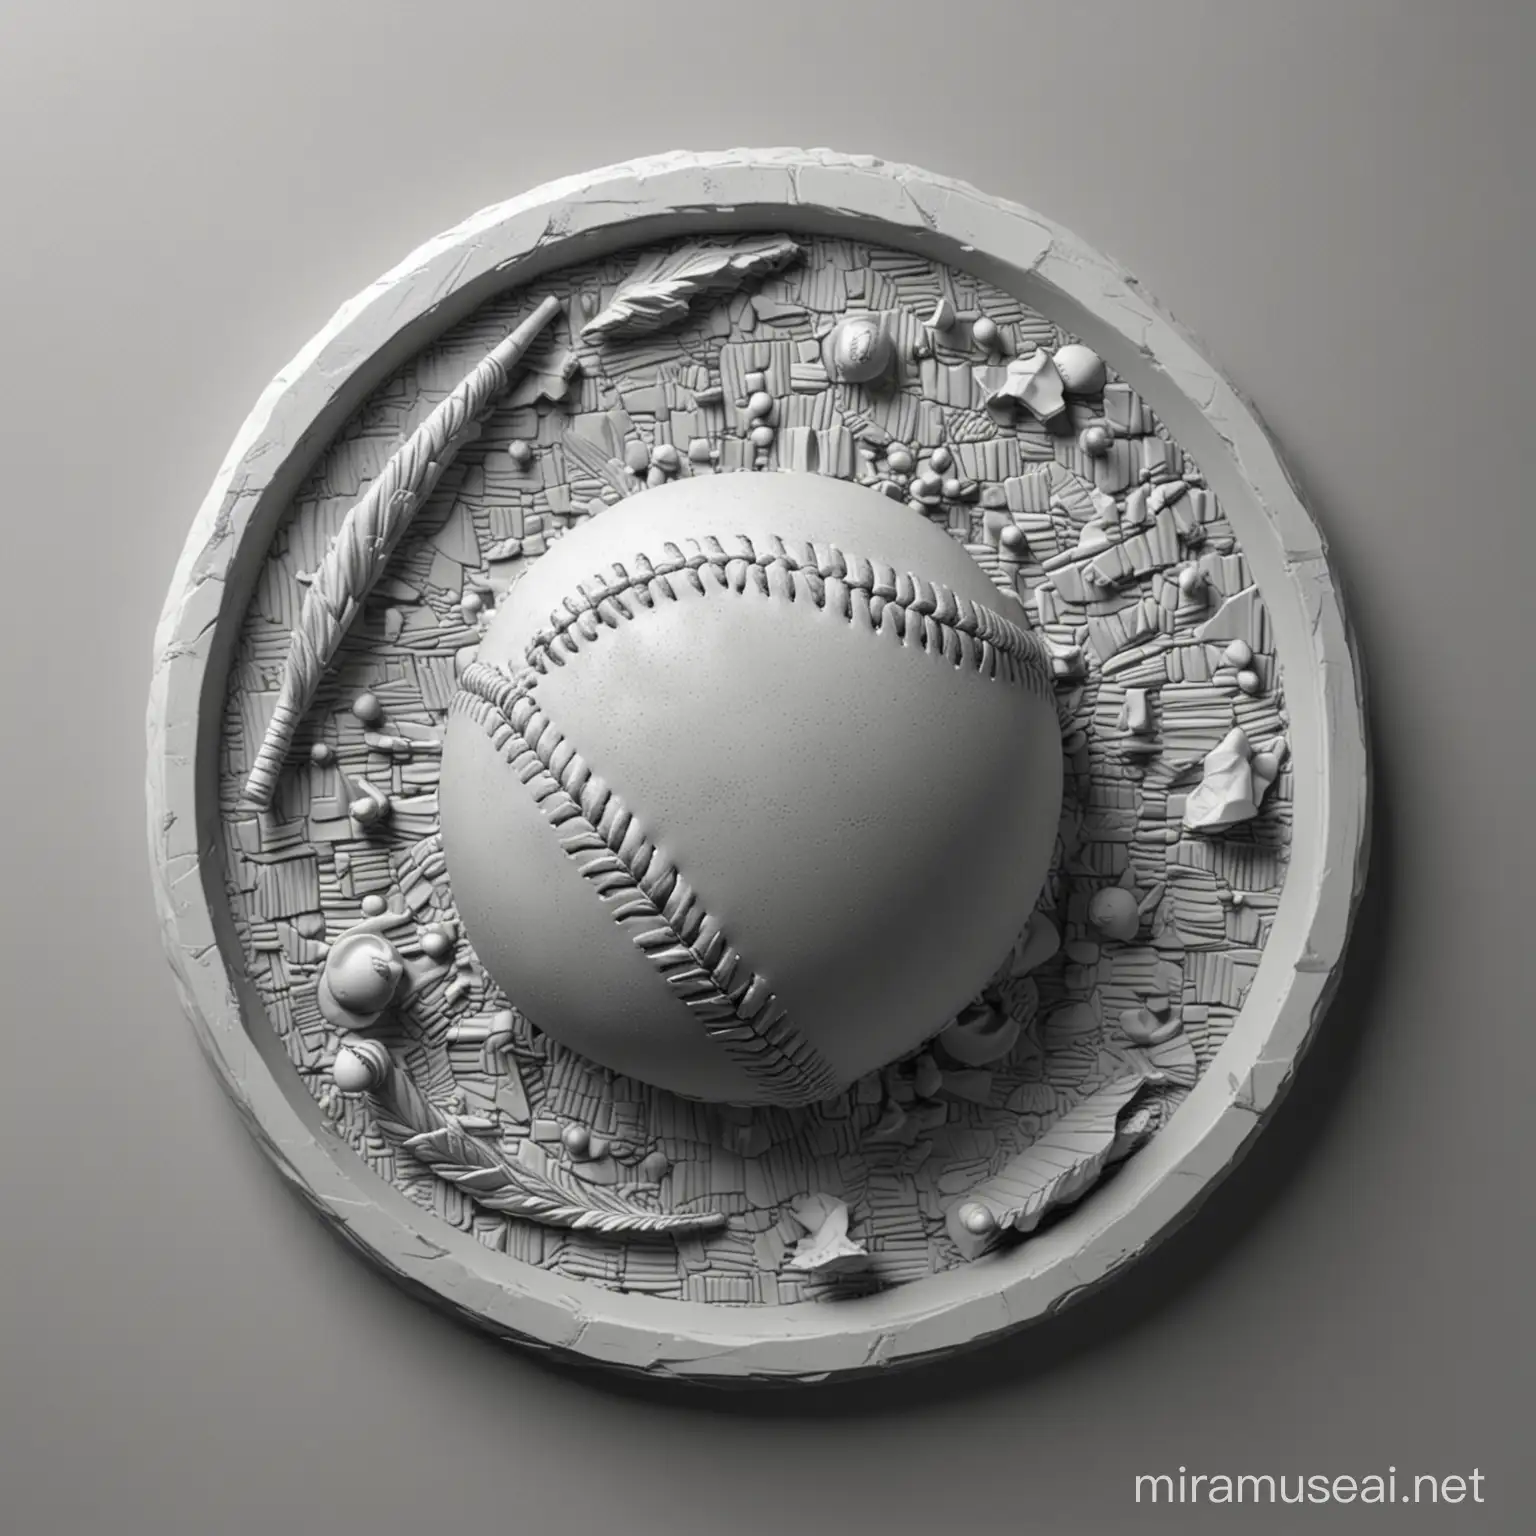 Dynamic Baseball in Flight 3D Depth Map Bas Relief with Balanced Lighting